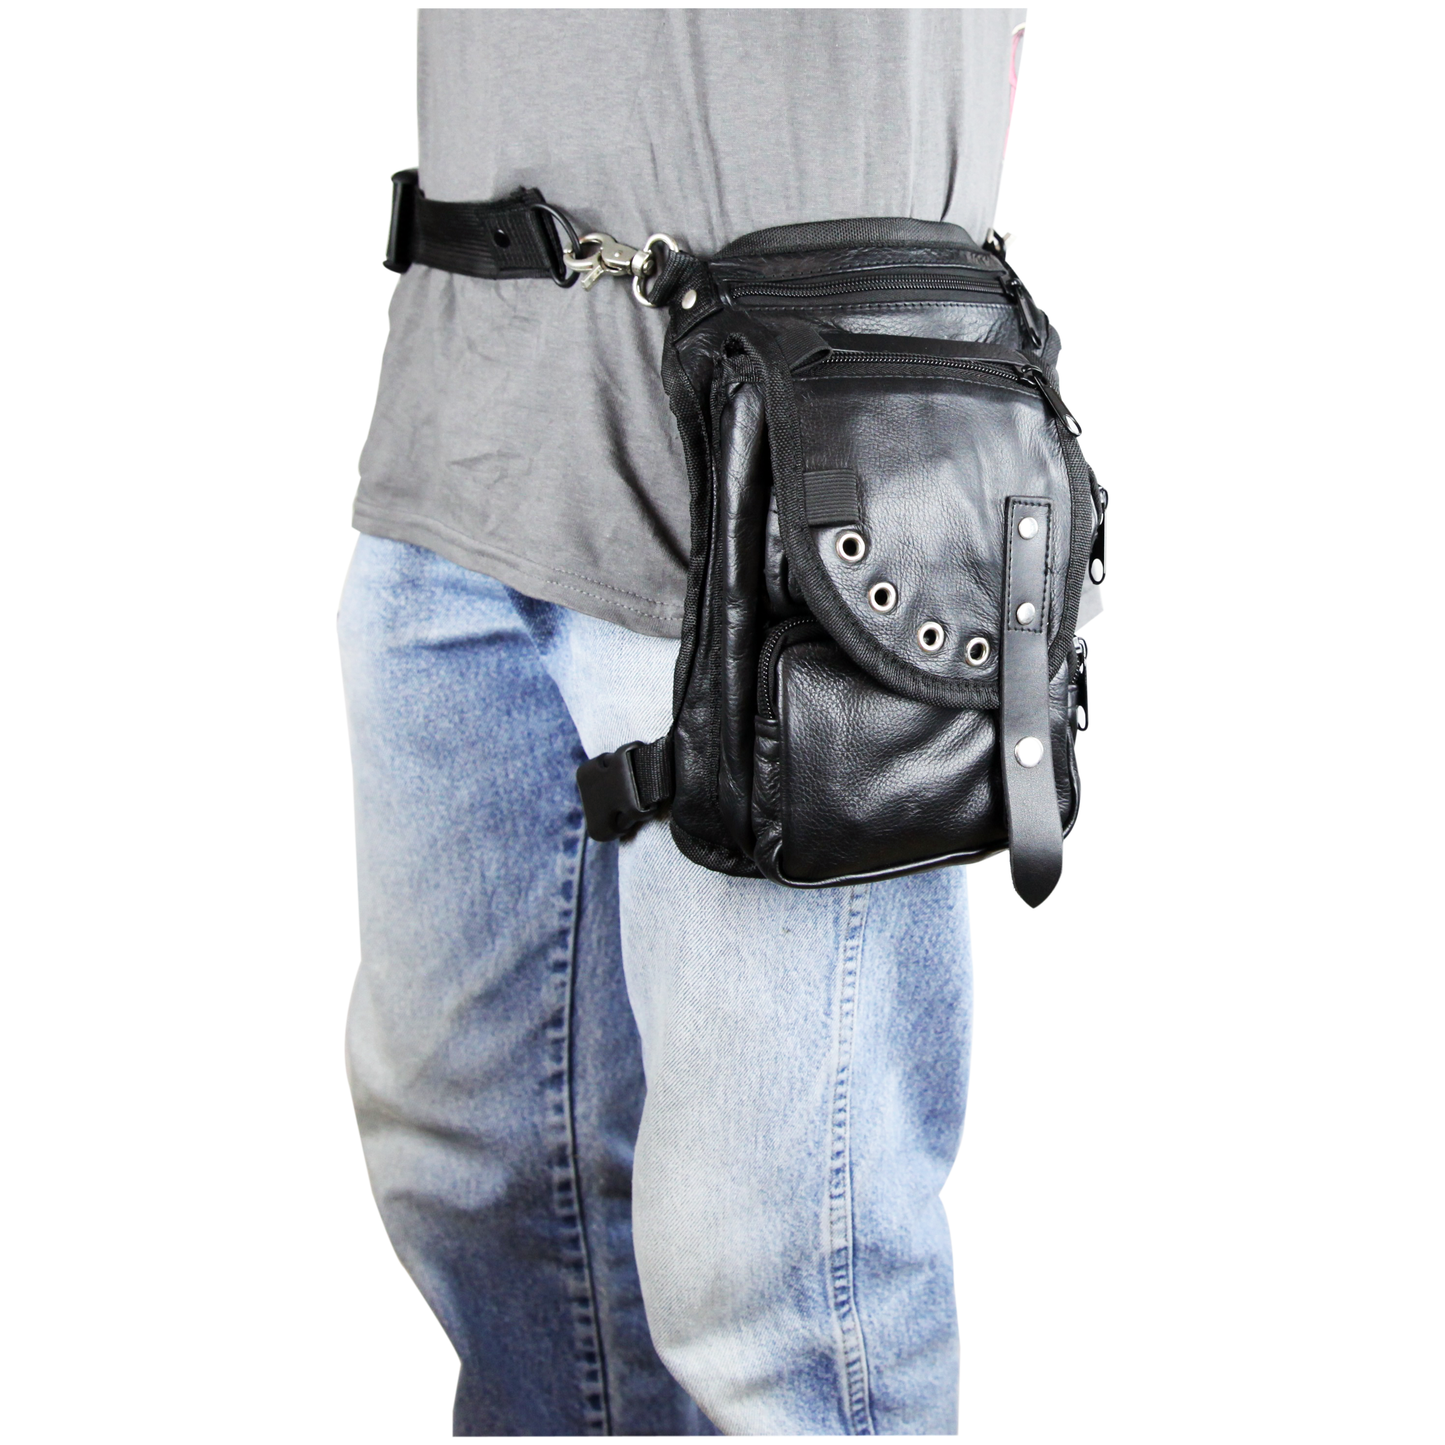 VA564 Black Carry Leather Thigh Bag with Waist Belt and concealed Gun Pocket